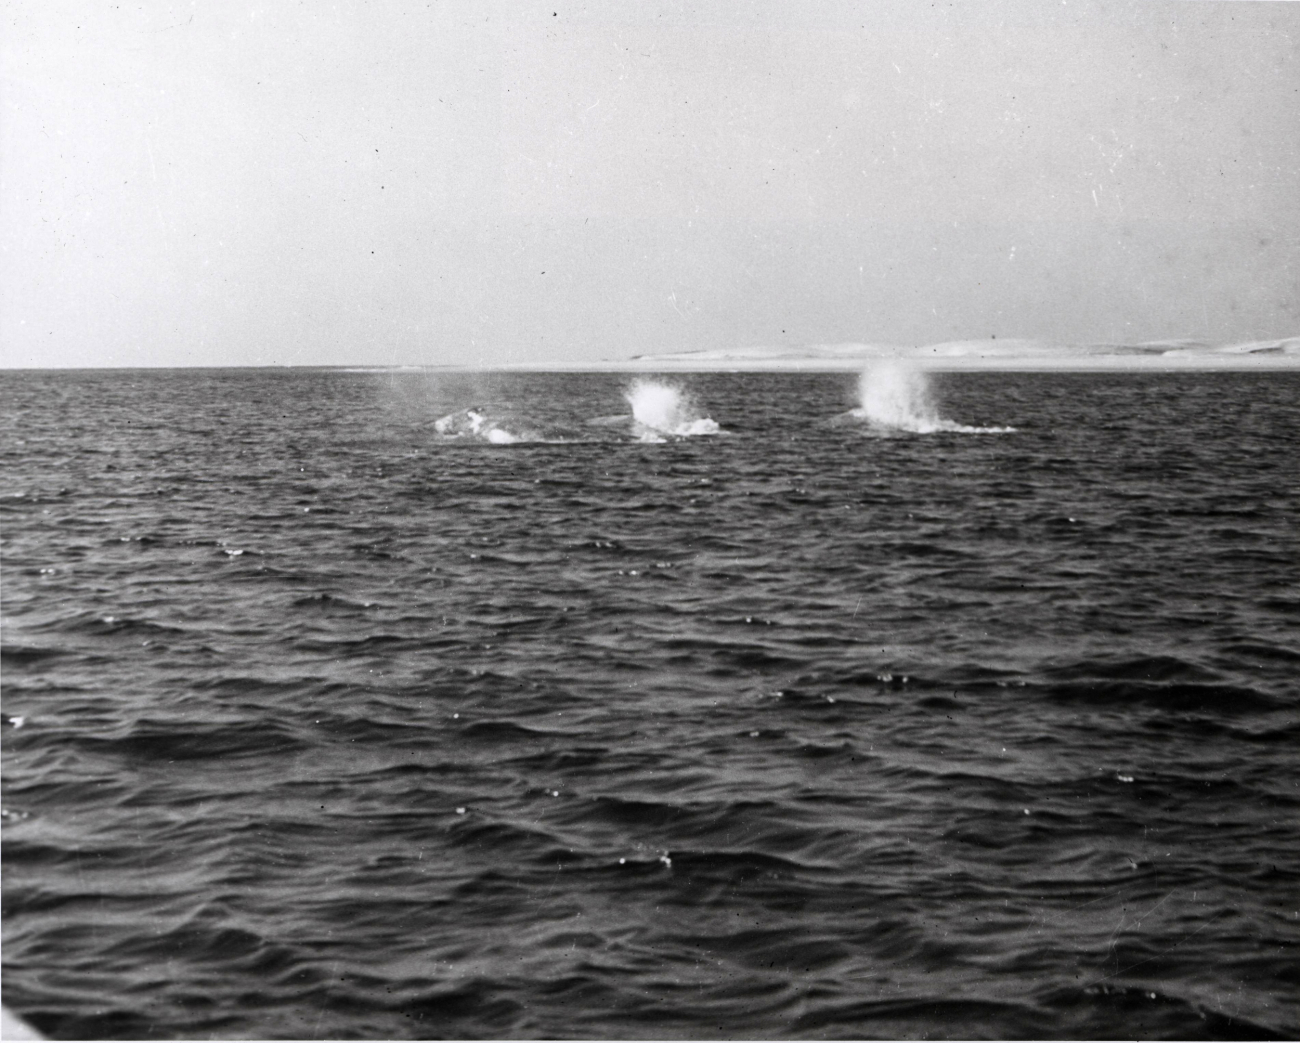 Three adult gray whales, probably two males and one female, plunging alongat about ten knots being pursued by observers in row boat